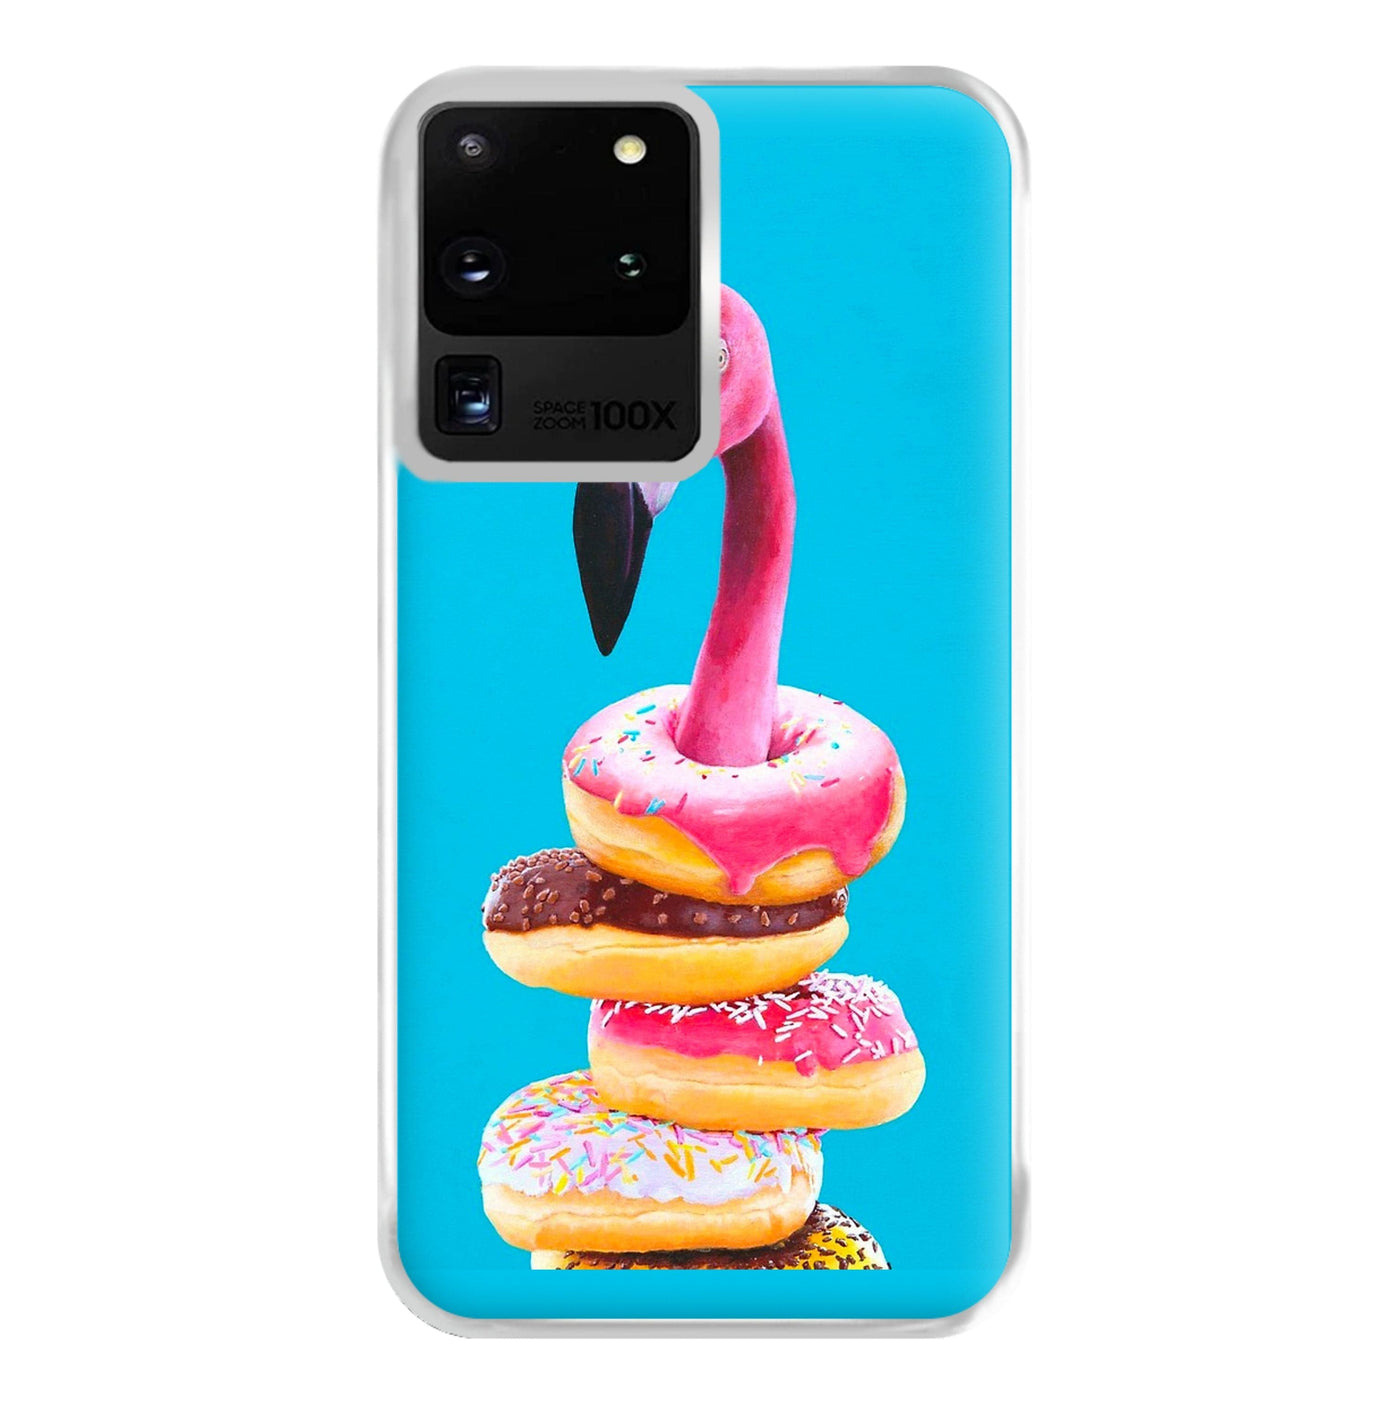 A Famished Flamingo Phone Case